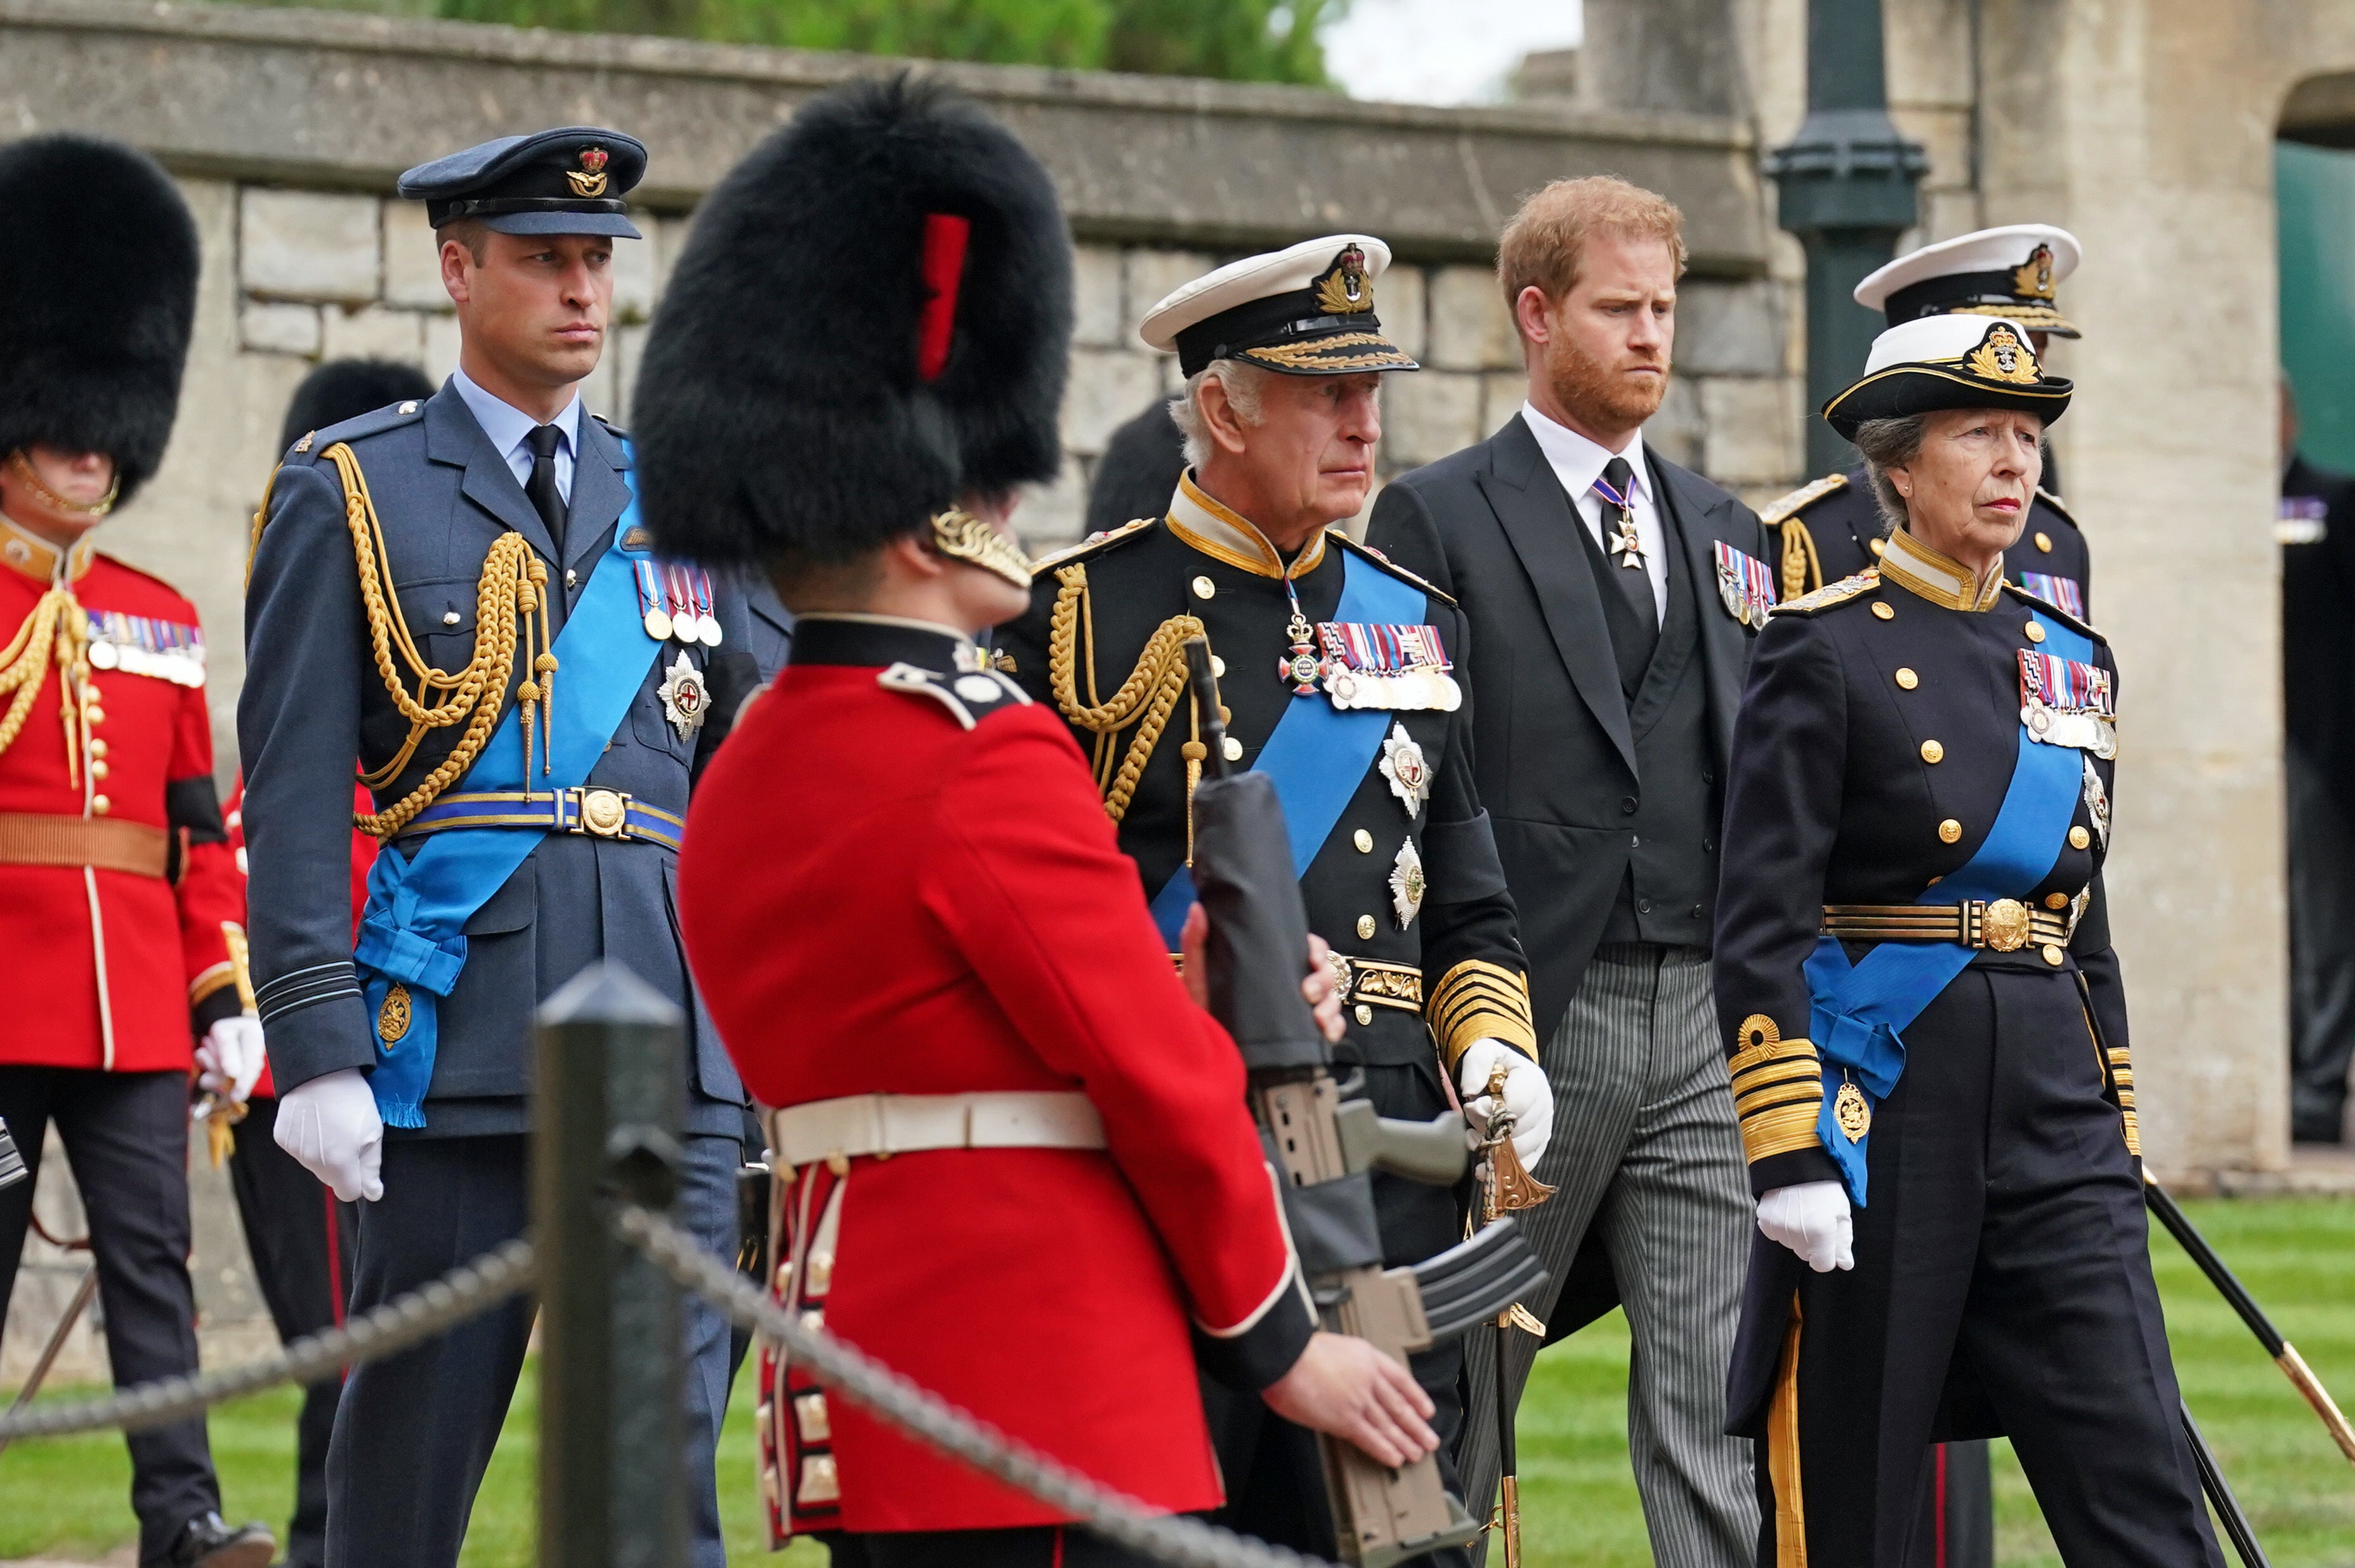 The Prince of Wales and the Duke of Sussex follow their father and the Princess Royal behind the hearse as it arrives at St George’s Chapel in Windsor Castle (Kirsty O’Connor/PA)